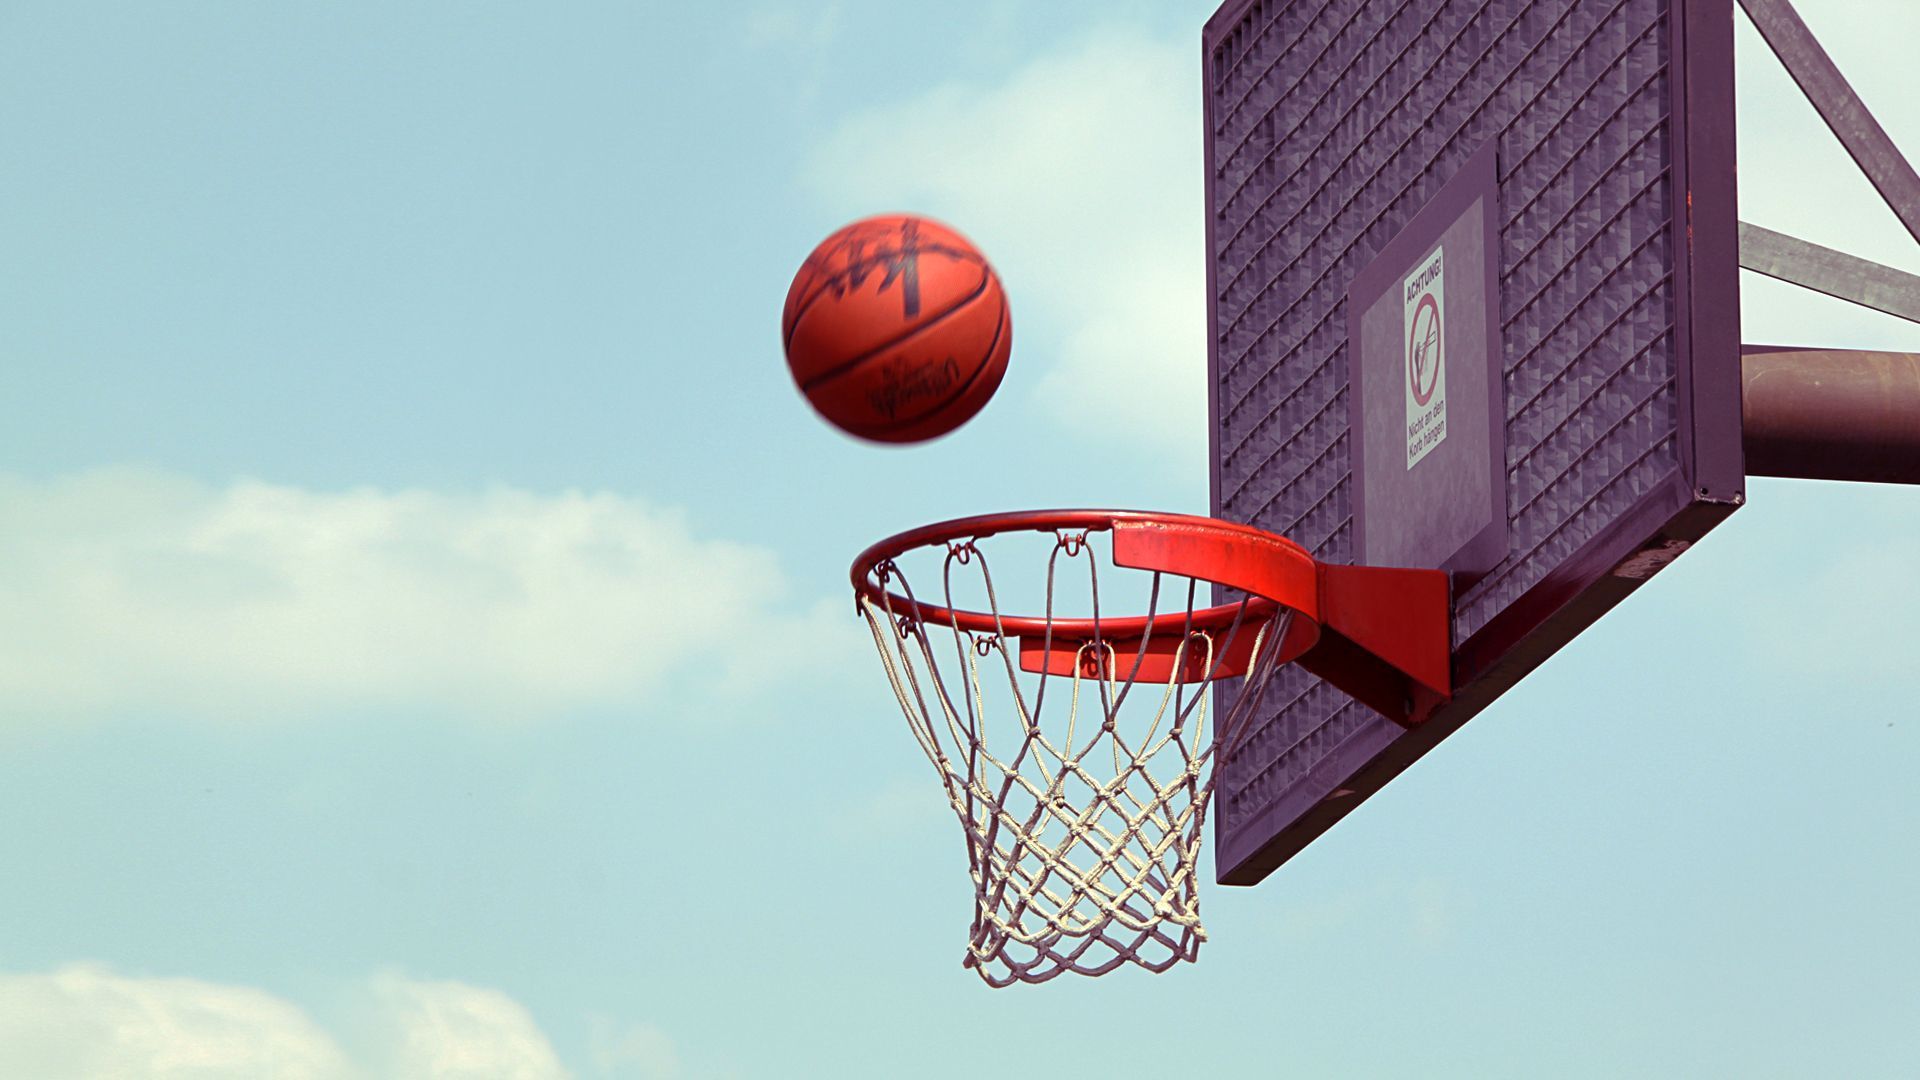 BasketBall Wallpapers Archives - of 6 - Wallpaper